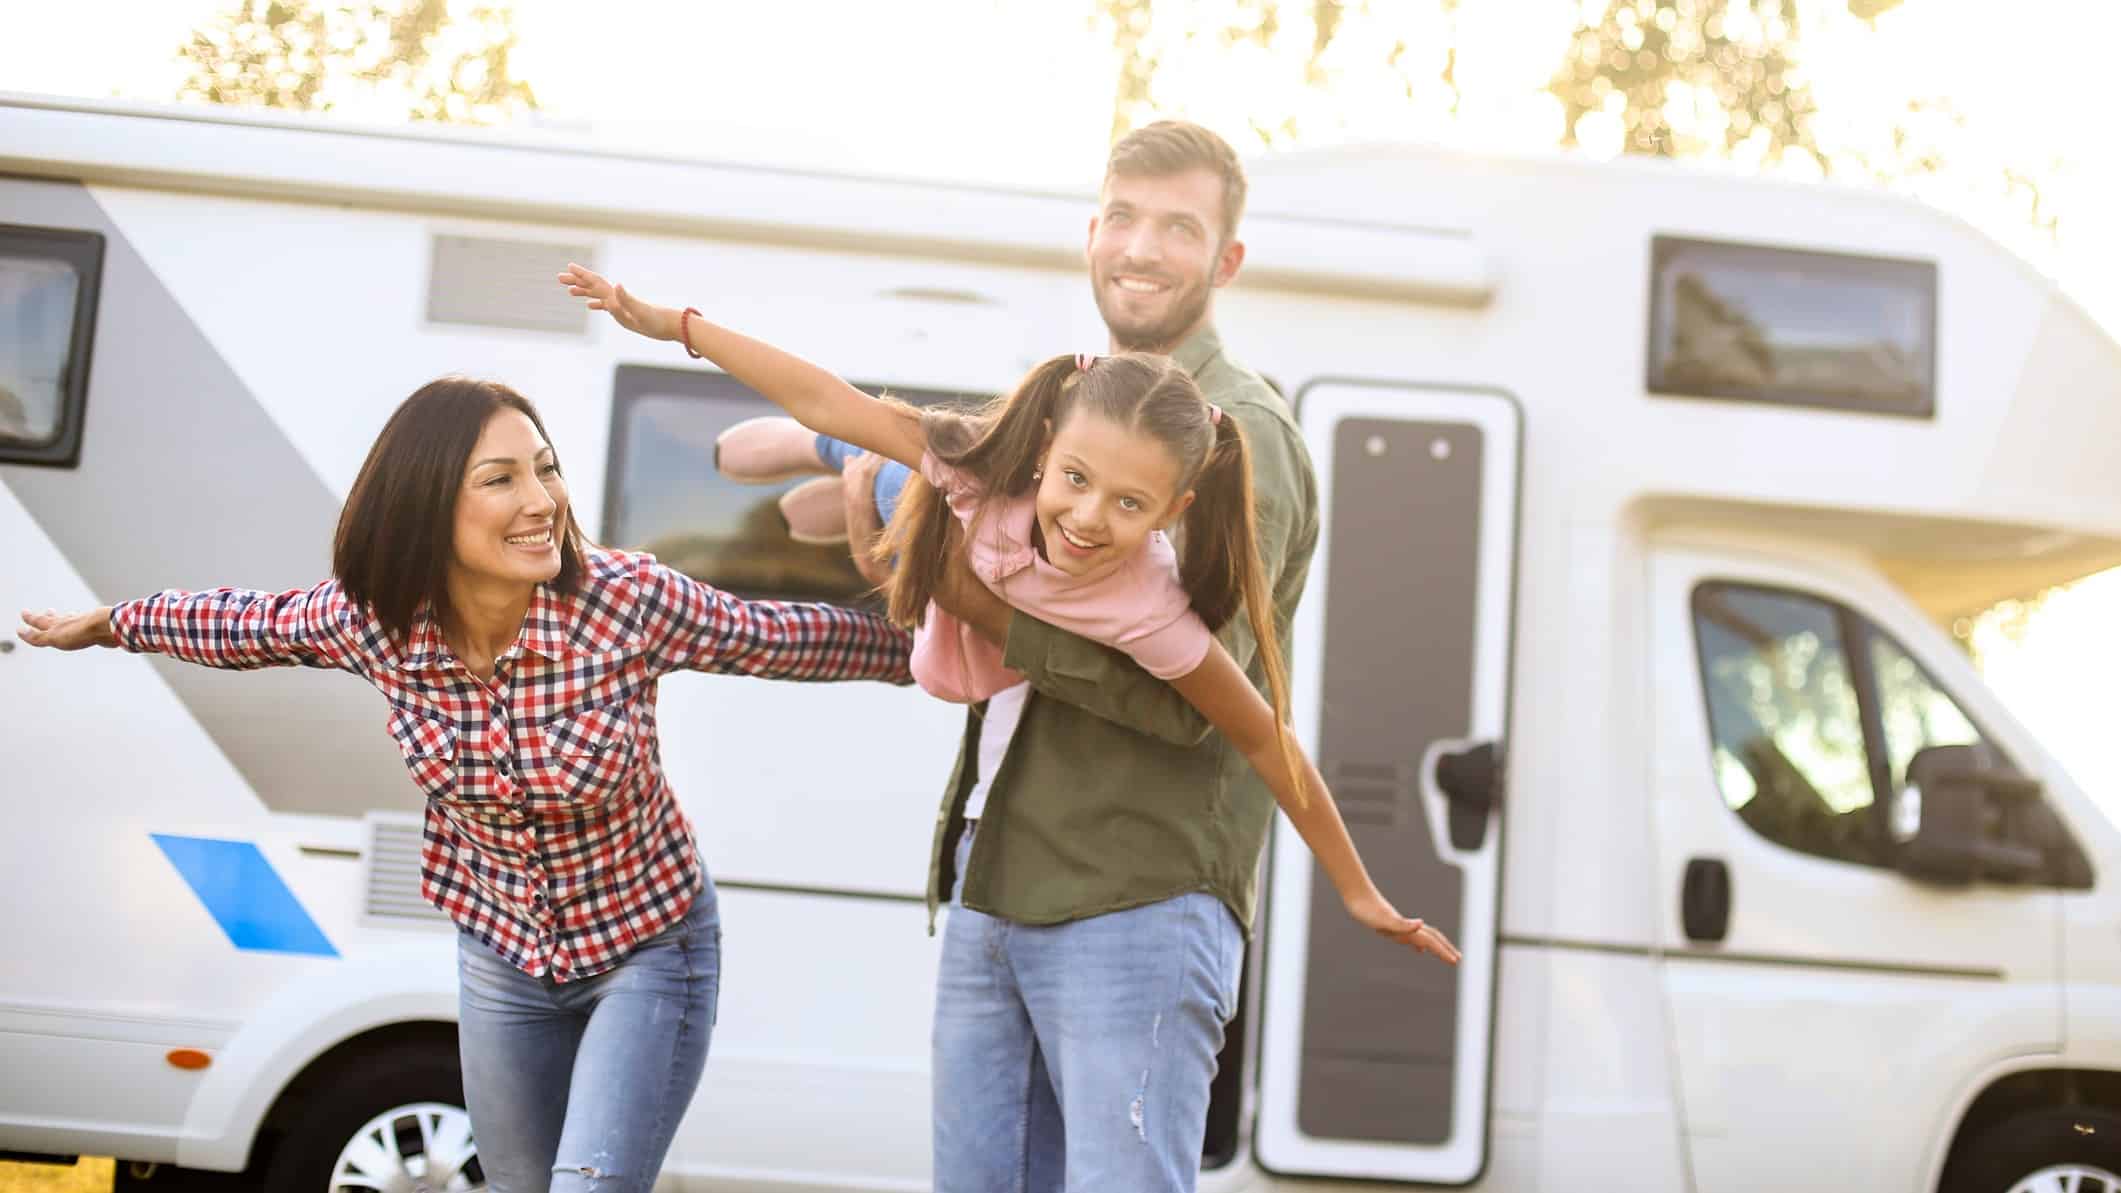 Man holds young girl out in a flying motion as mum watches on, all in front of a motorhome.